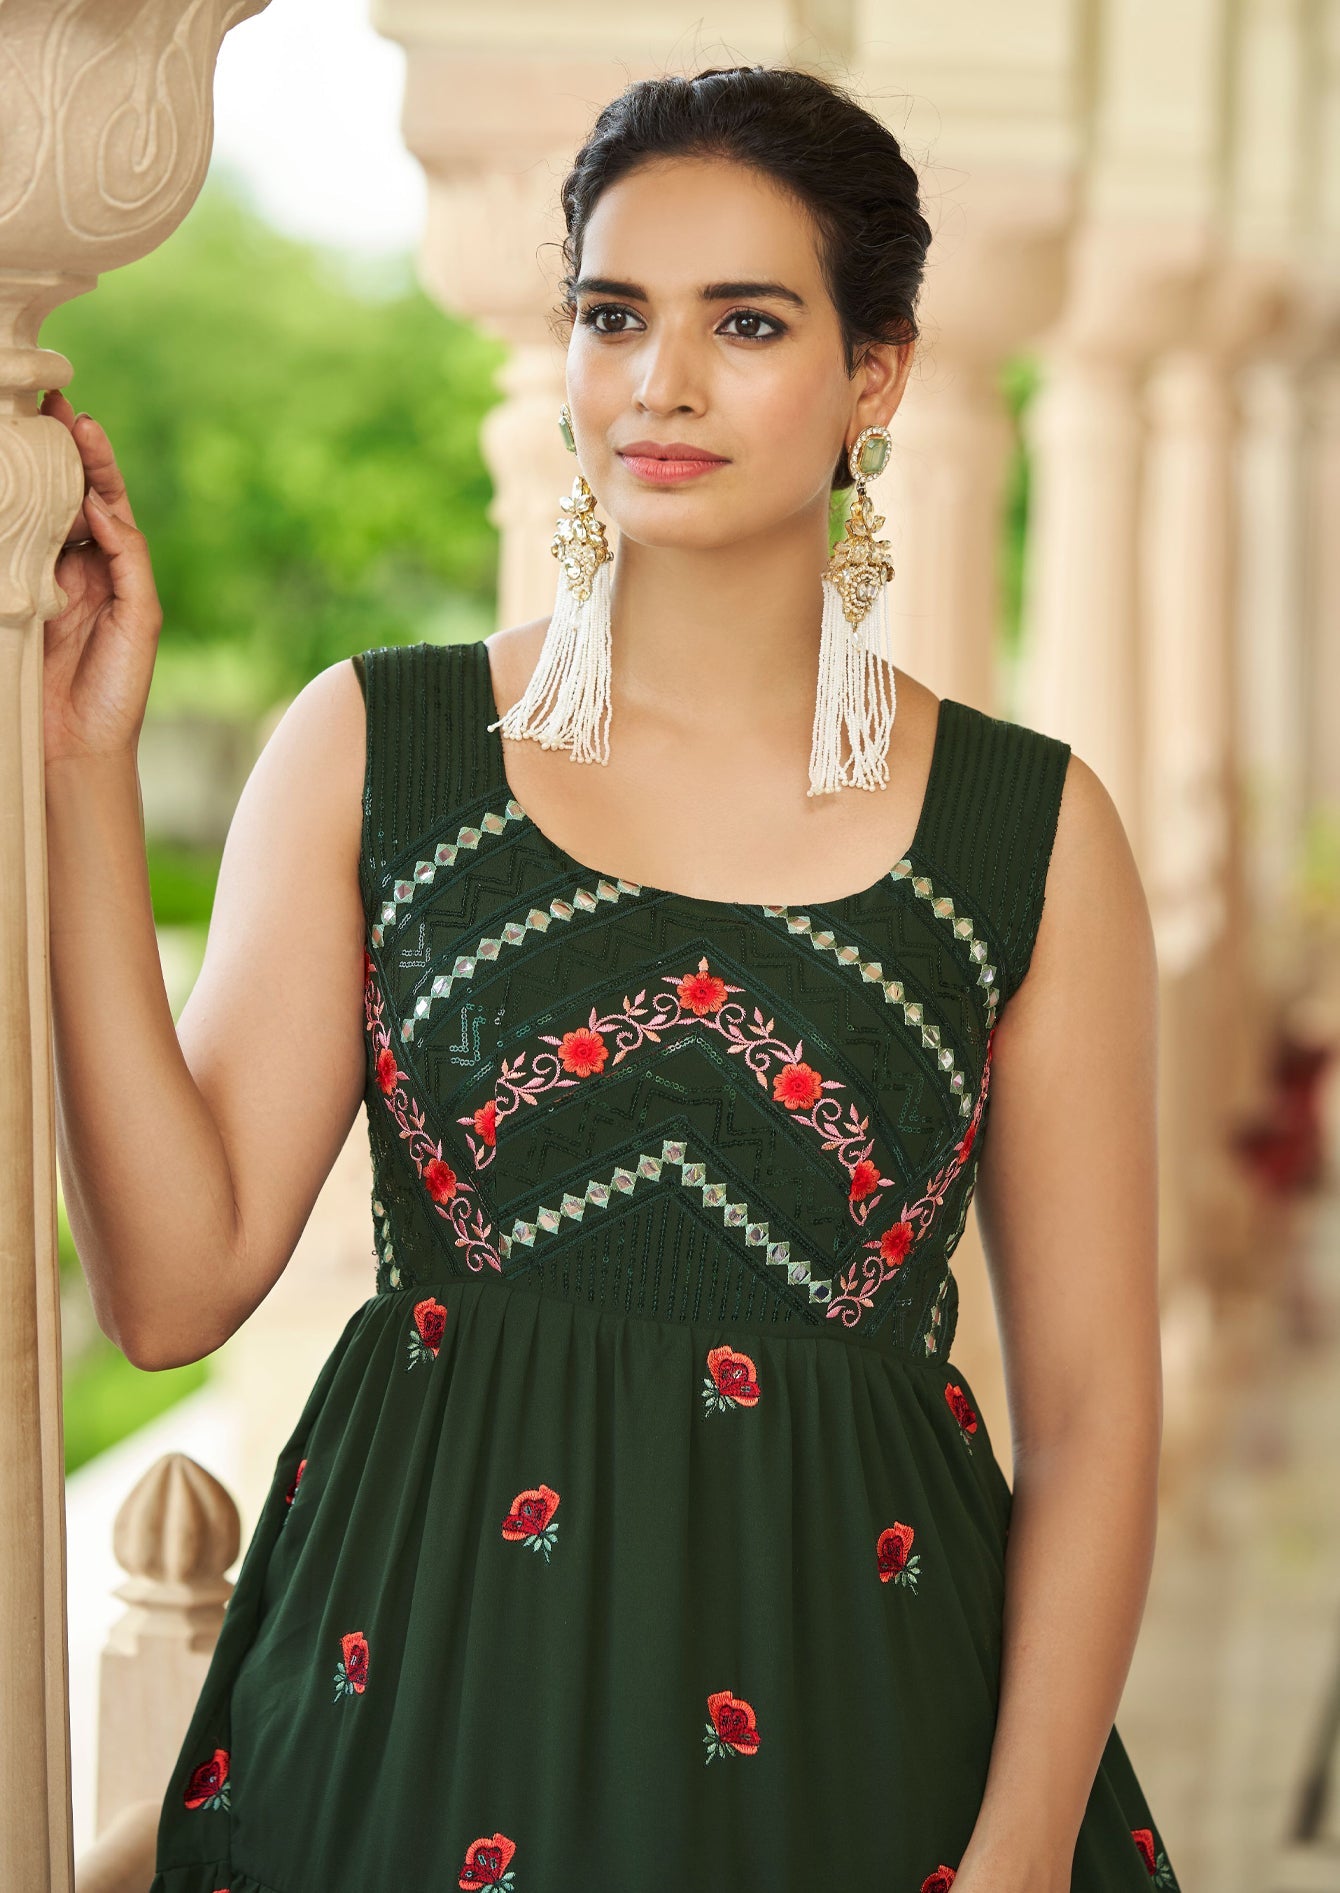 Embroidered Georgette Anarkali Long Gown In Green